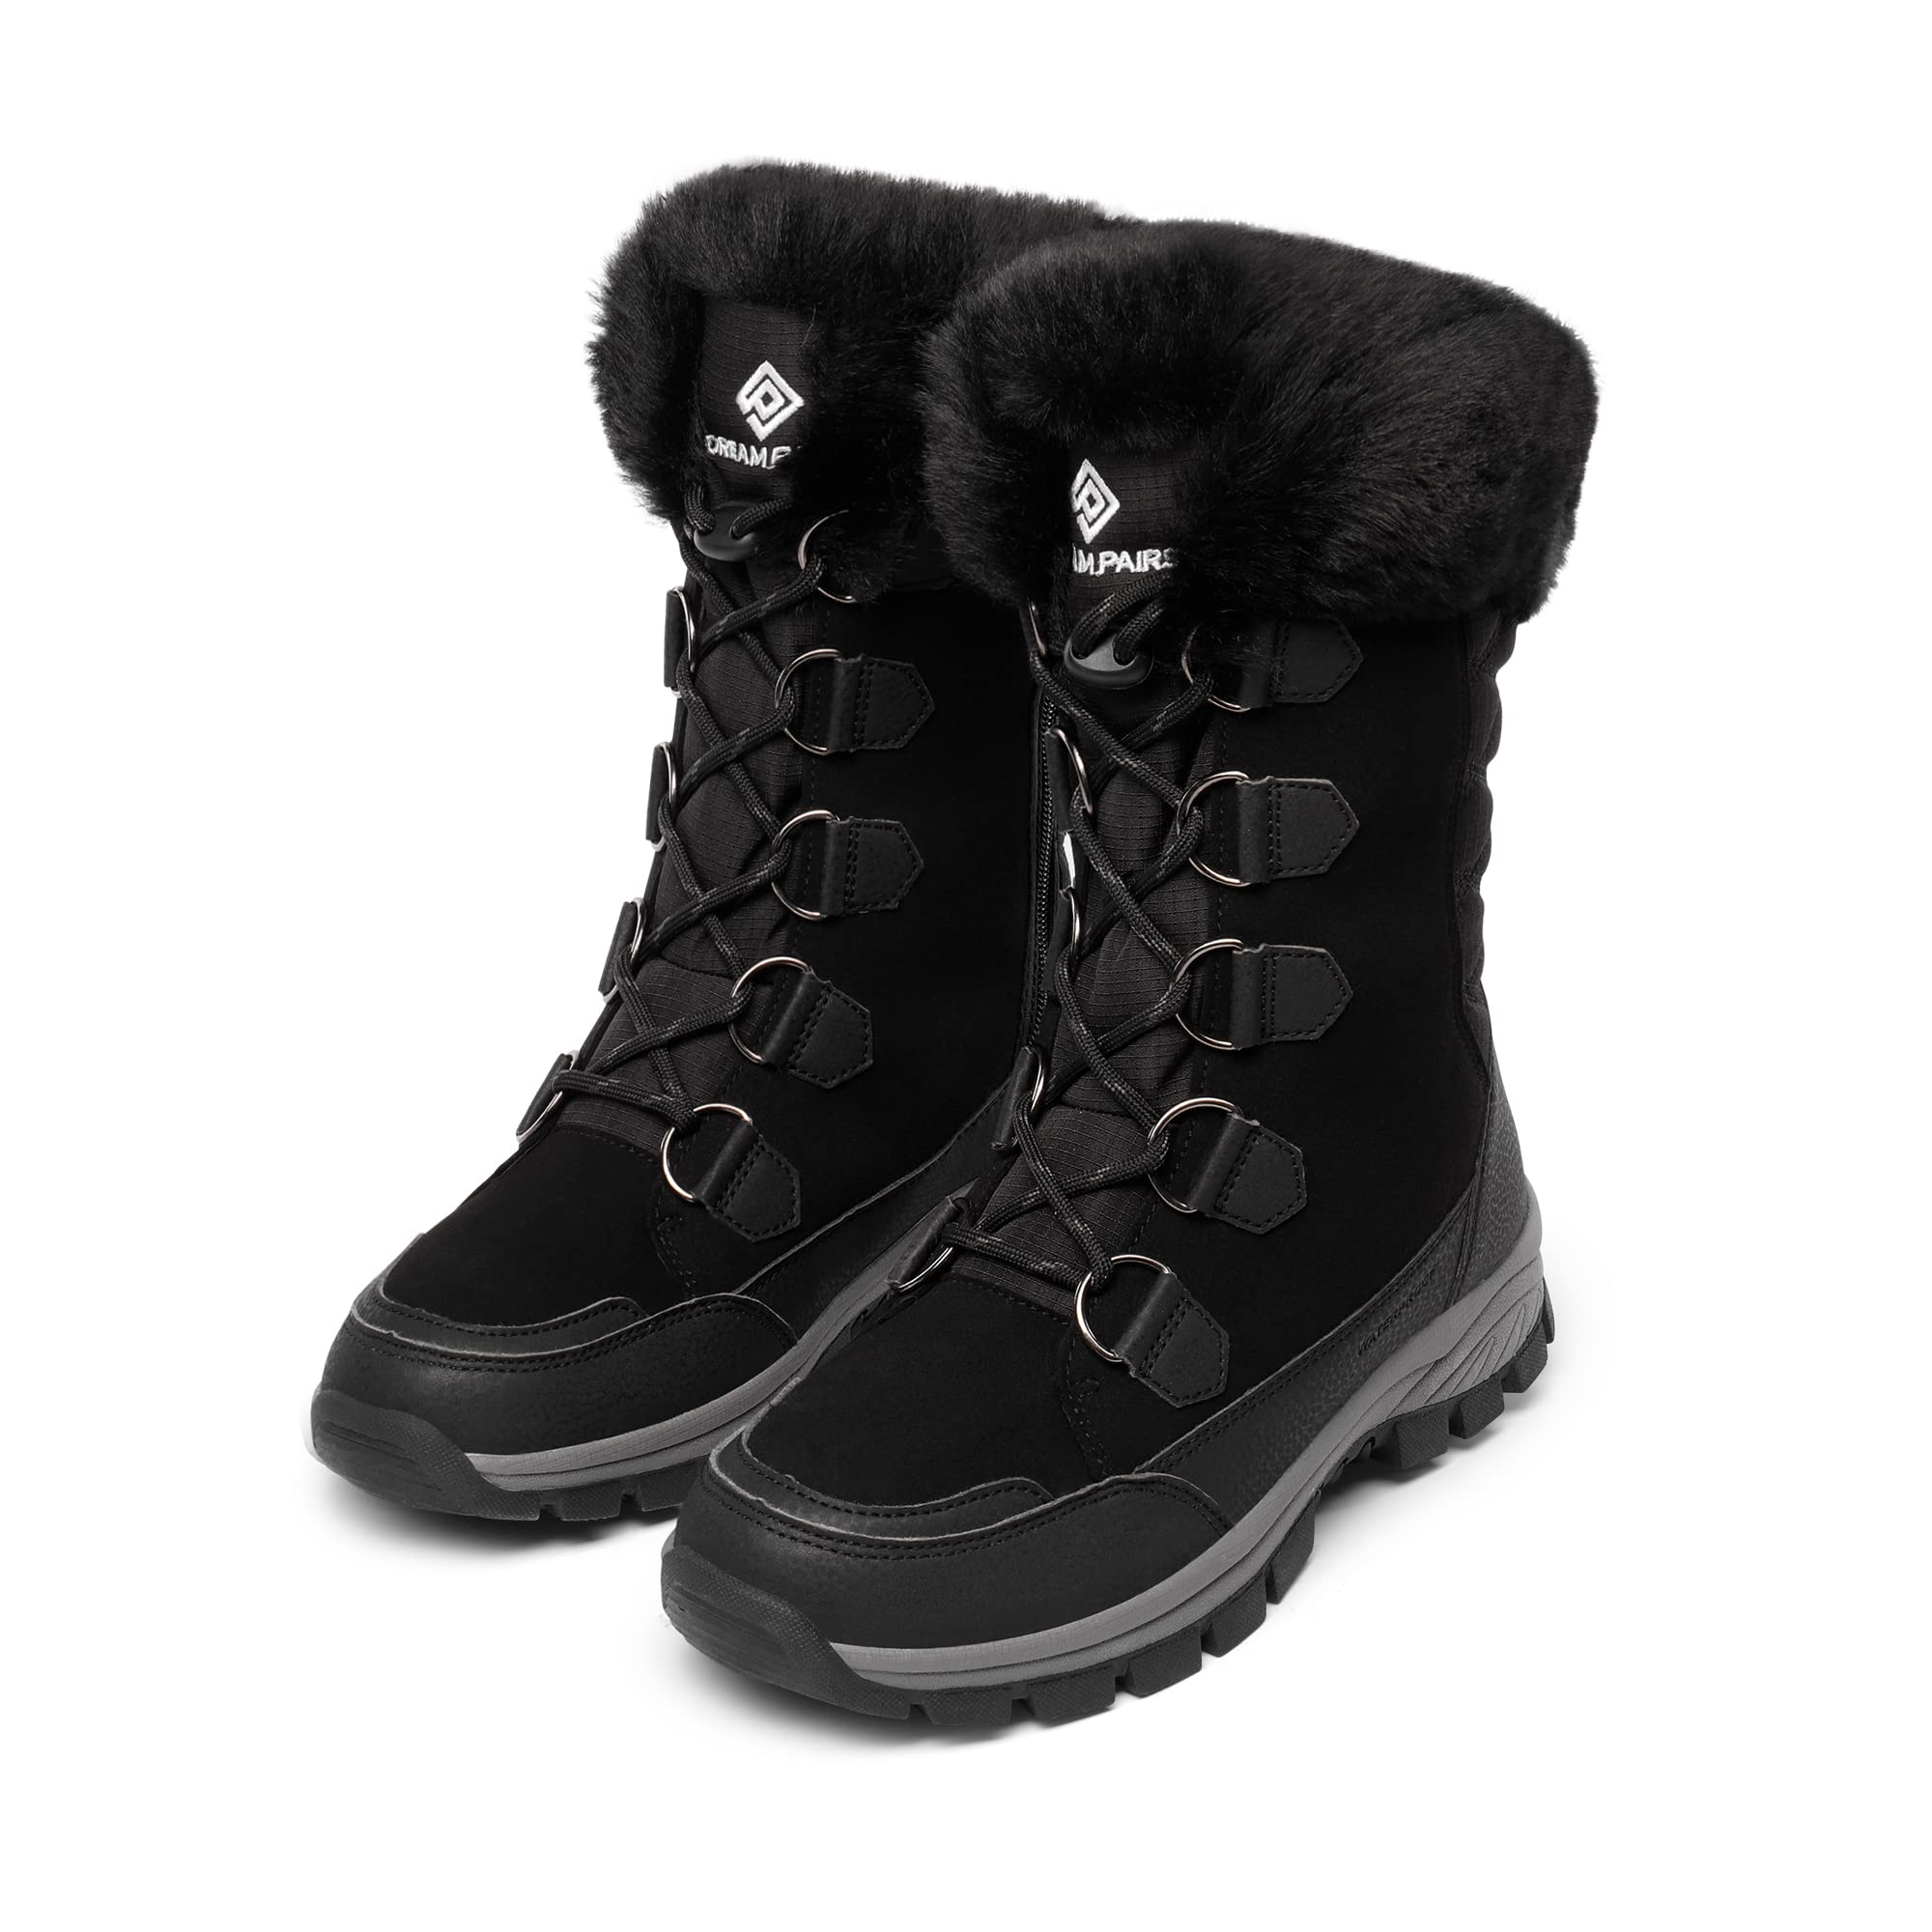 DREAM PAIRS Women's Waterproof Winter Snow Boots, Warm Comfortable Faux Fur Insulated Non-Slip Outdoor Lace-Up Mid Calf Booties